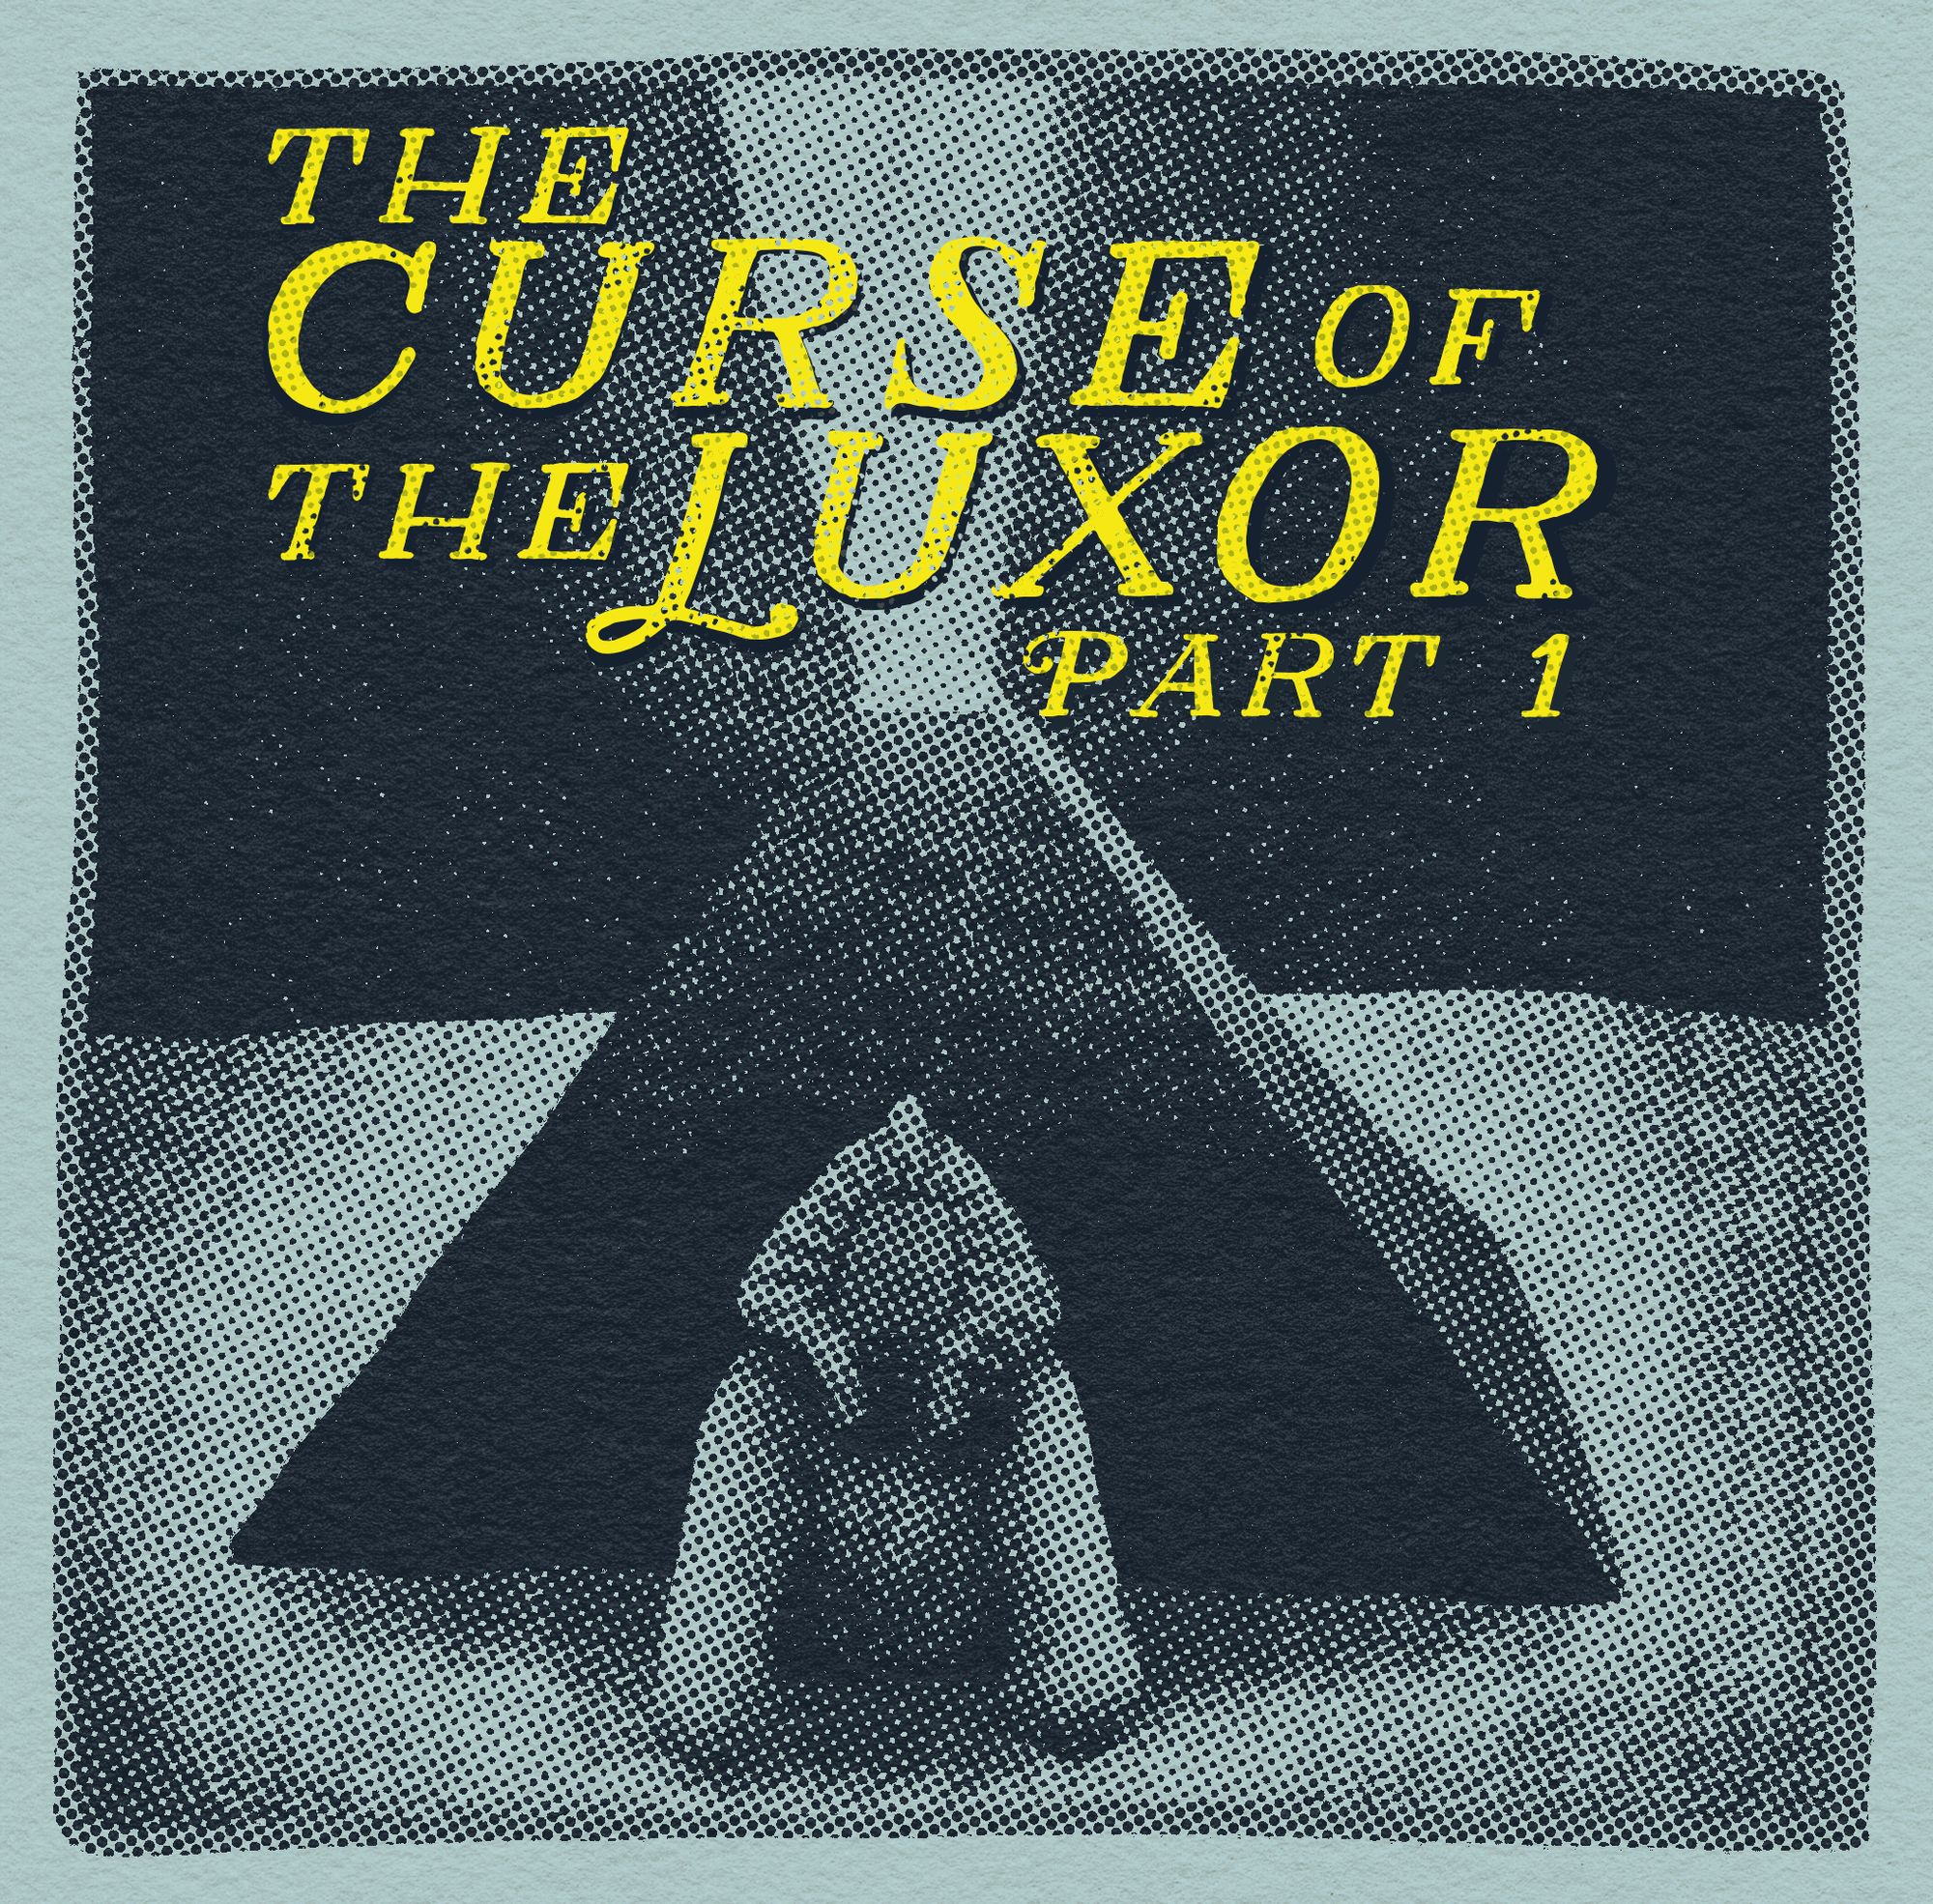 a halftone illustration of the Luxor hotel with the words The Curse of The Luxor Part 1